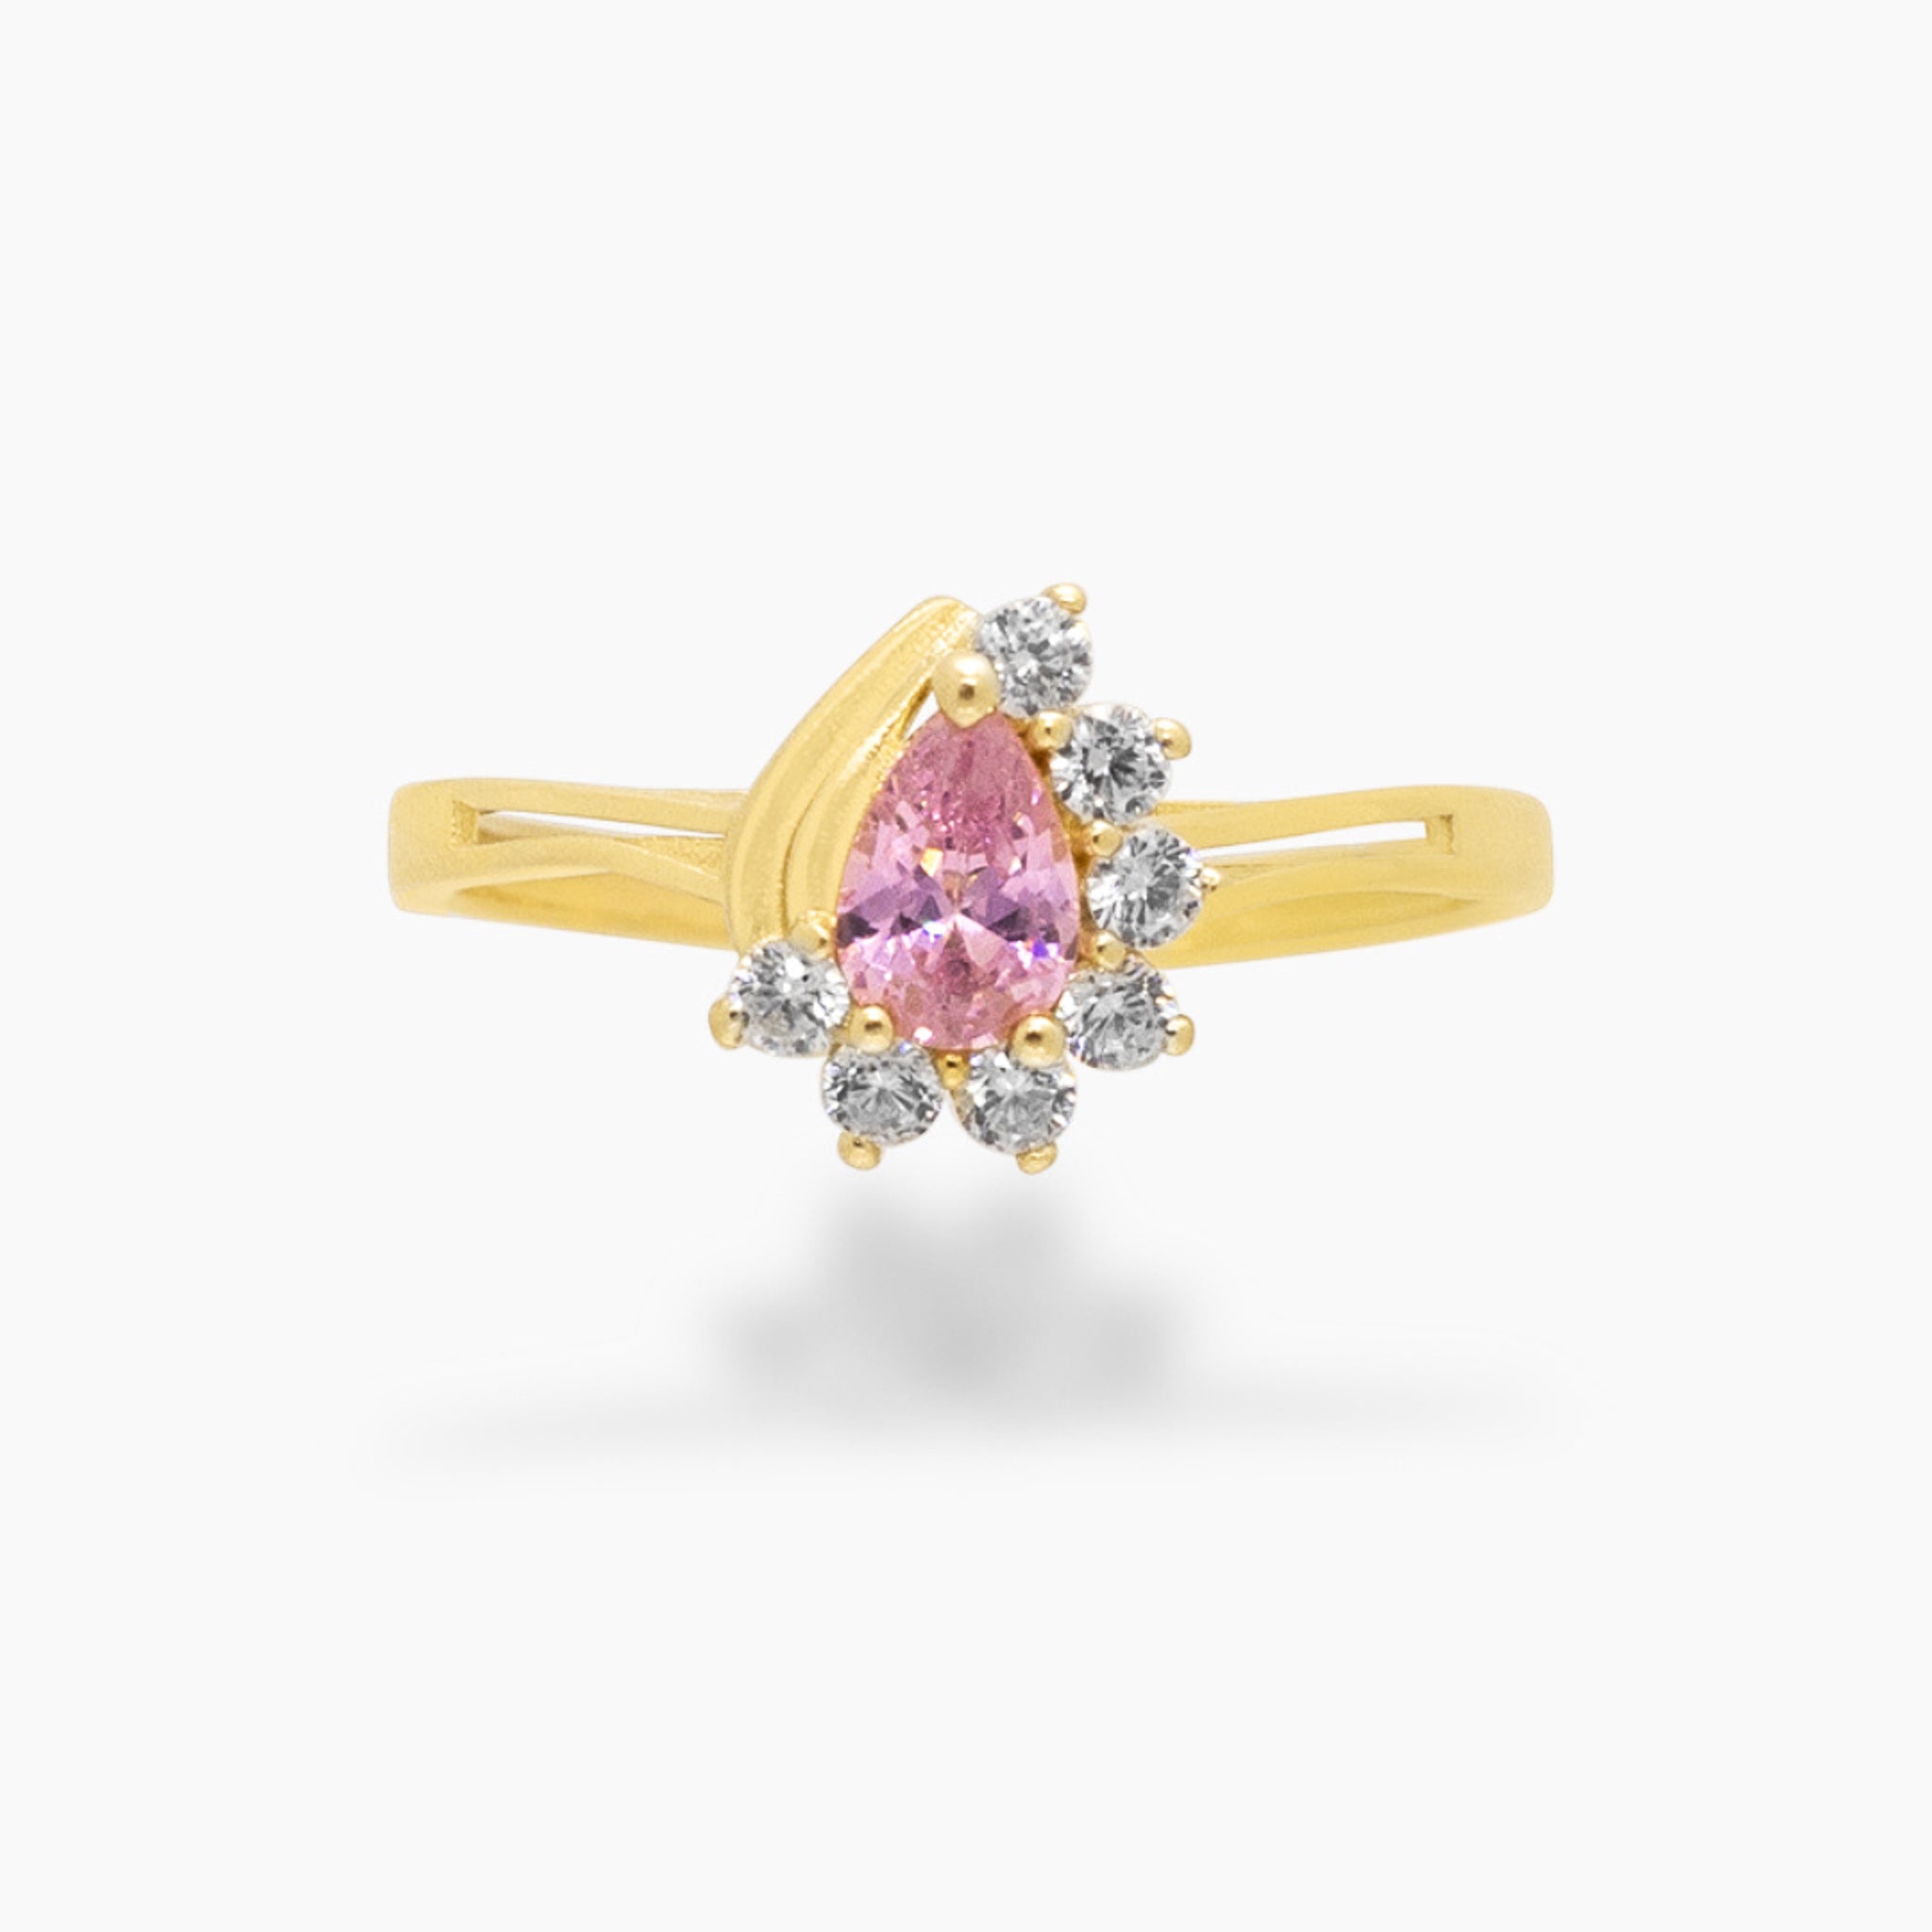 14K YELLOW GOLD FRILLS CZ PINK PEAR RING